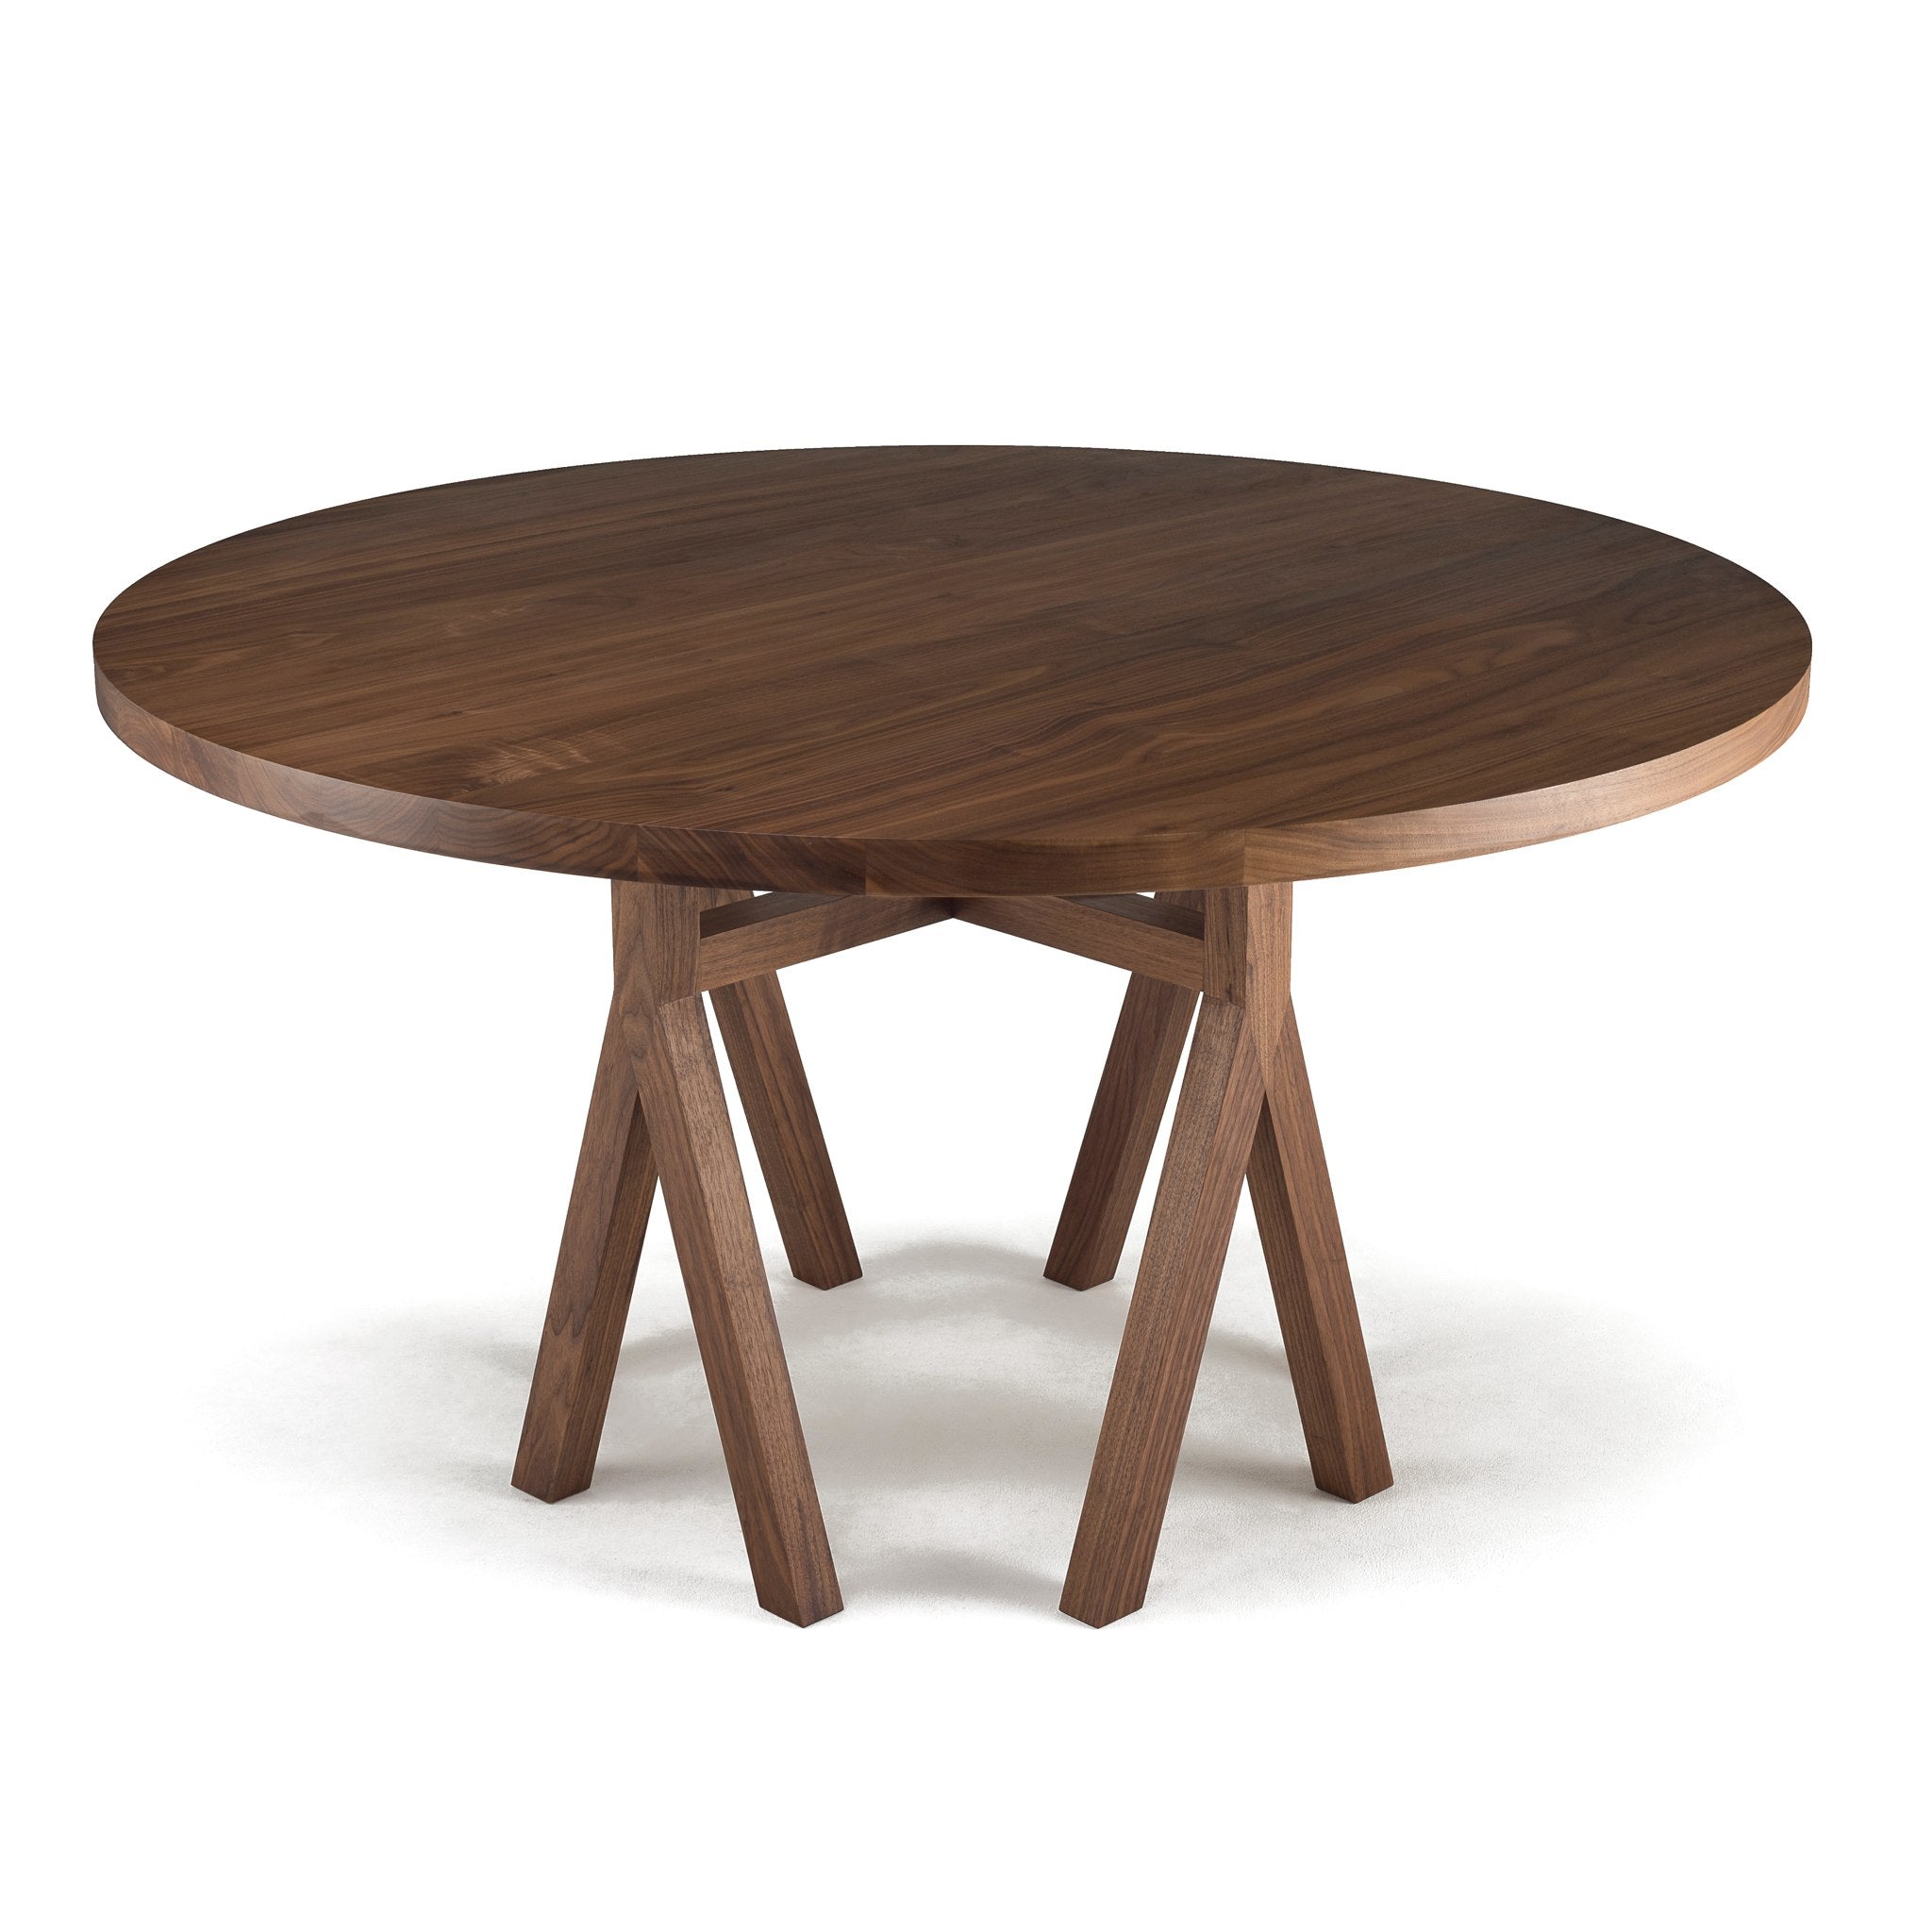 Commune Dining Table by Neri & Hu